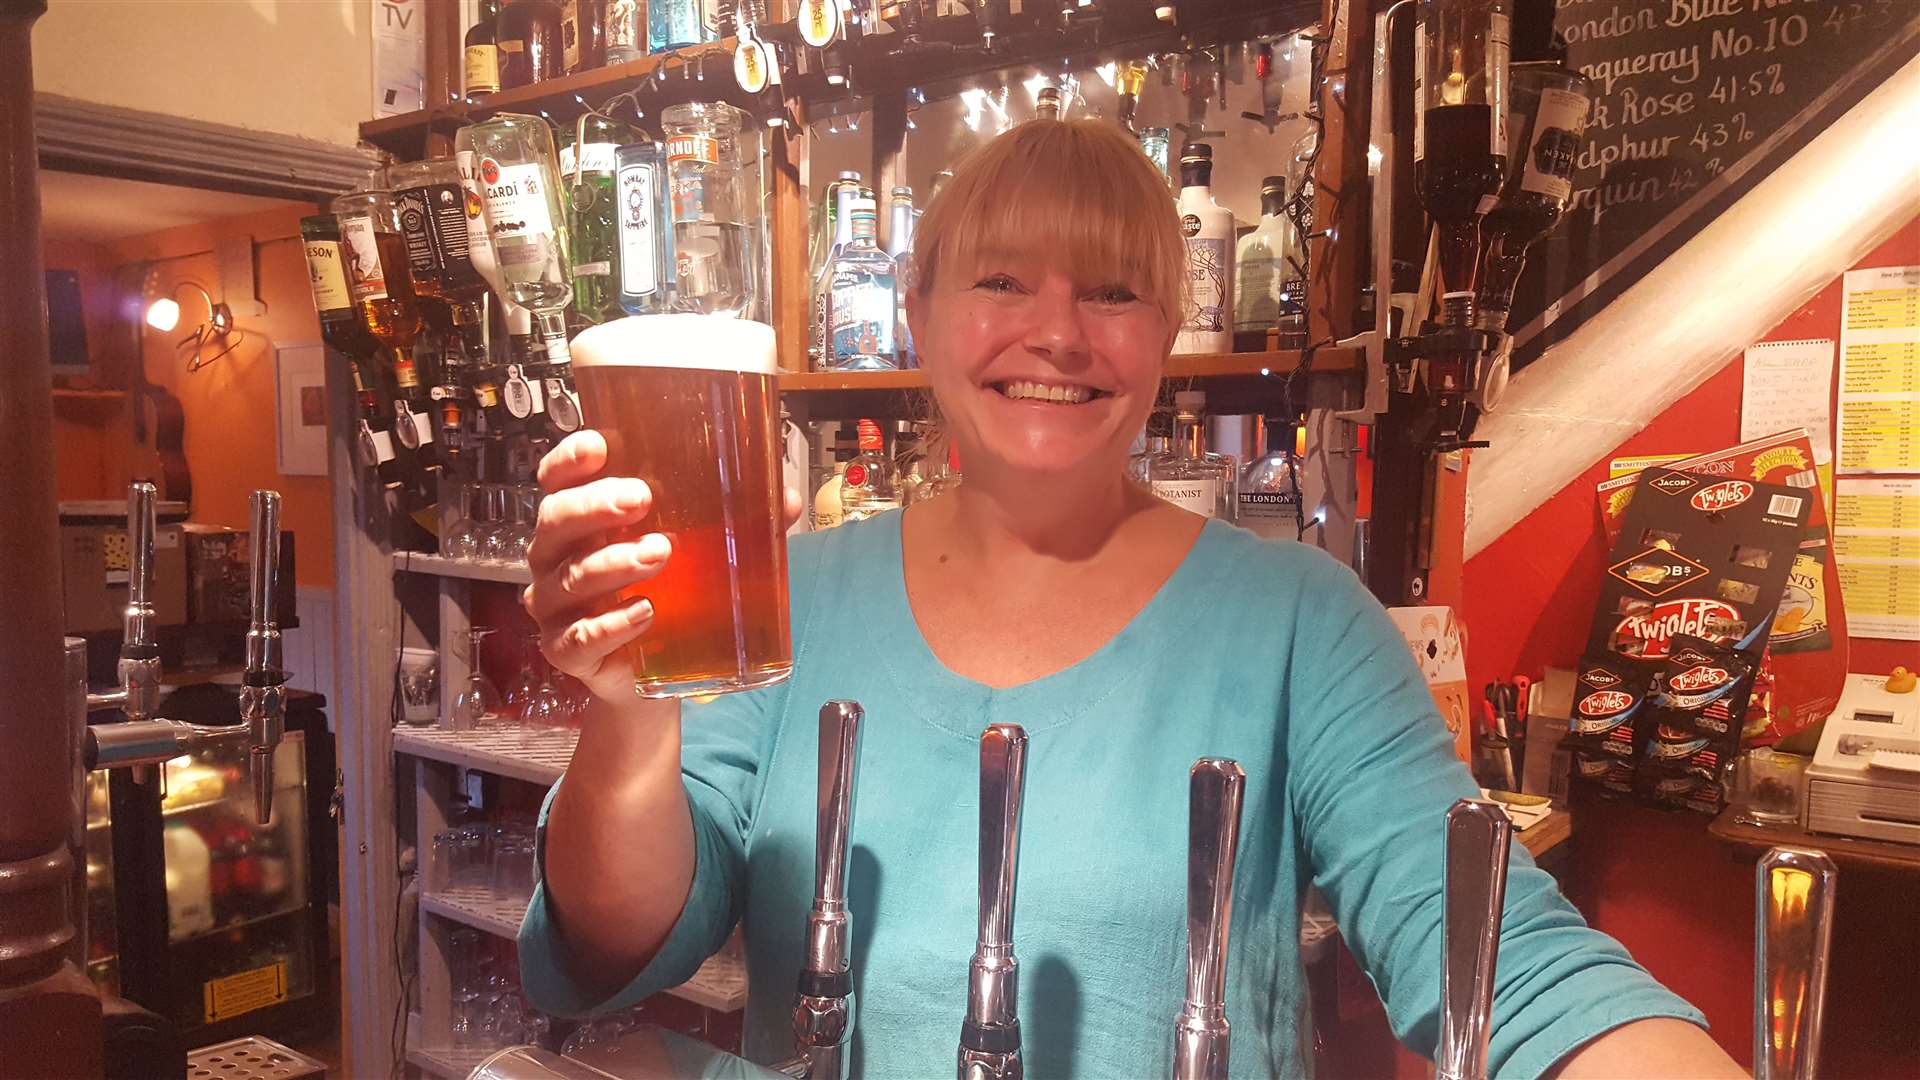 The New Inn landlady Katrina Maclean is welcoming punters this St George's Day.